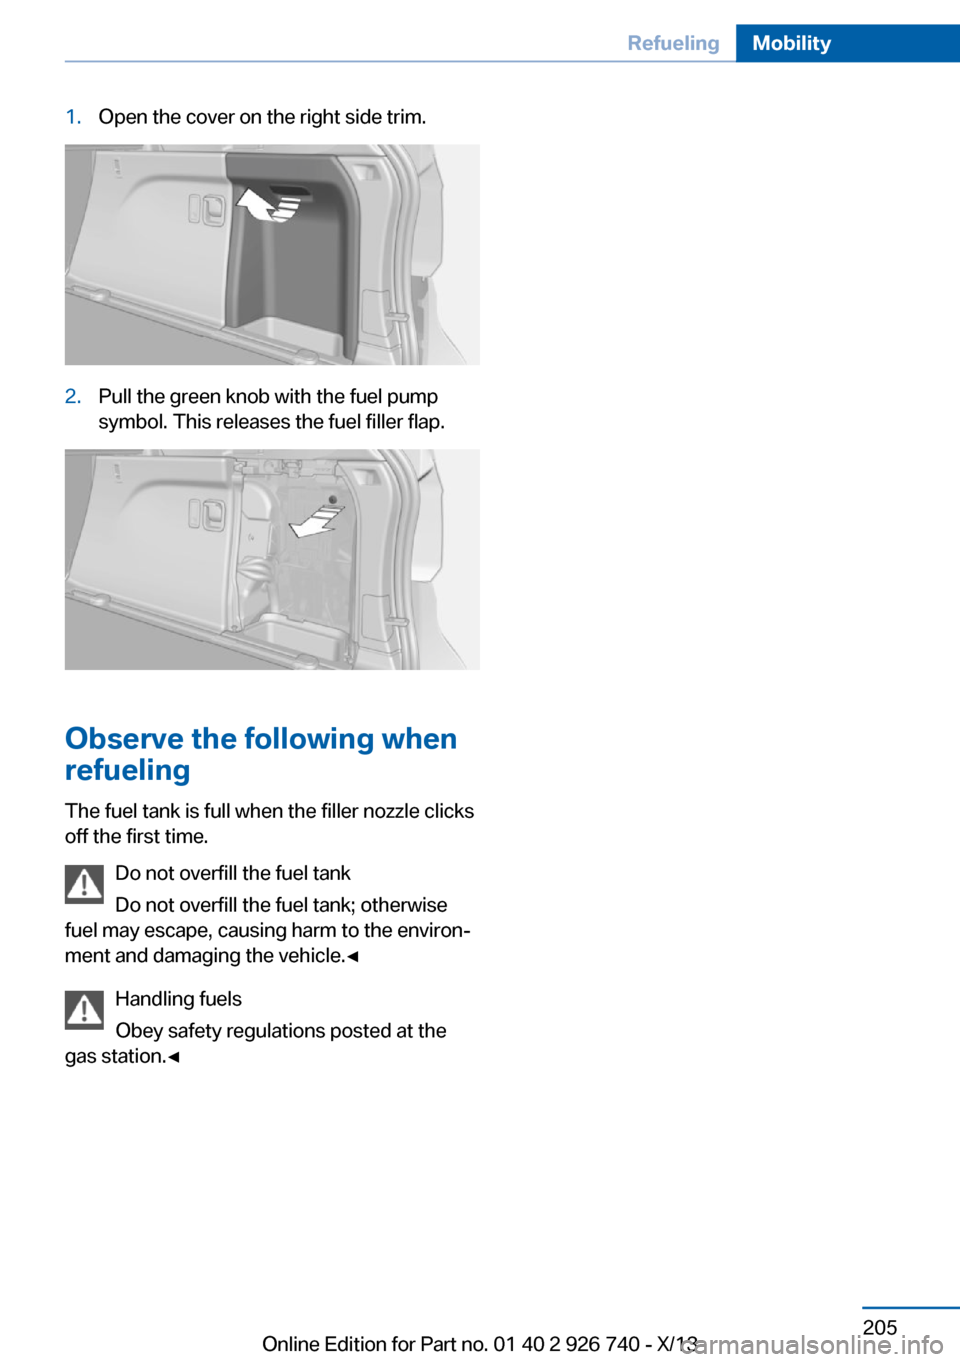 BMW X5 2014 F15 Owners Manual 1.Open the cover on the right side trim.2.Pull the green knob with the fuel pump
symbol. This releases the fuel filler flap.
Observe the following when
refueling
The fuel tank is full when the filler 